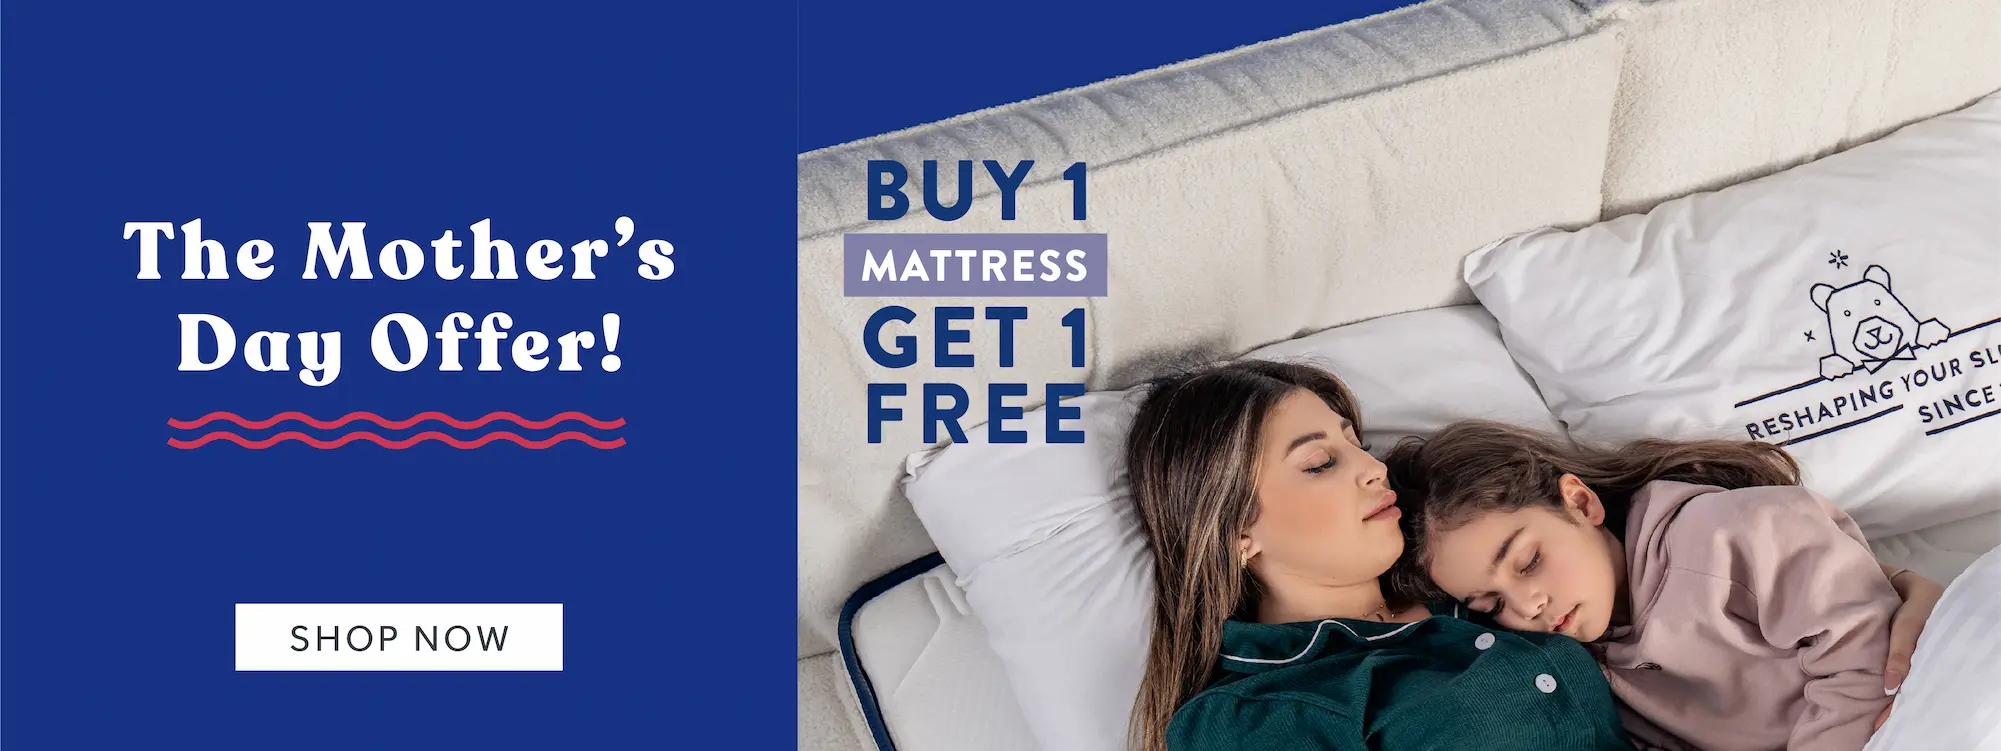 Mother's Day Offer Buy 1 mattress get 1 free